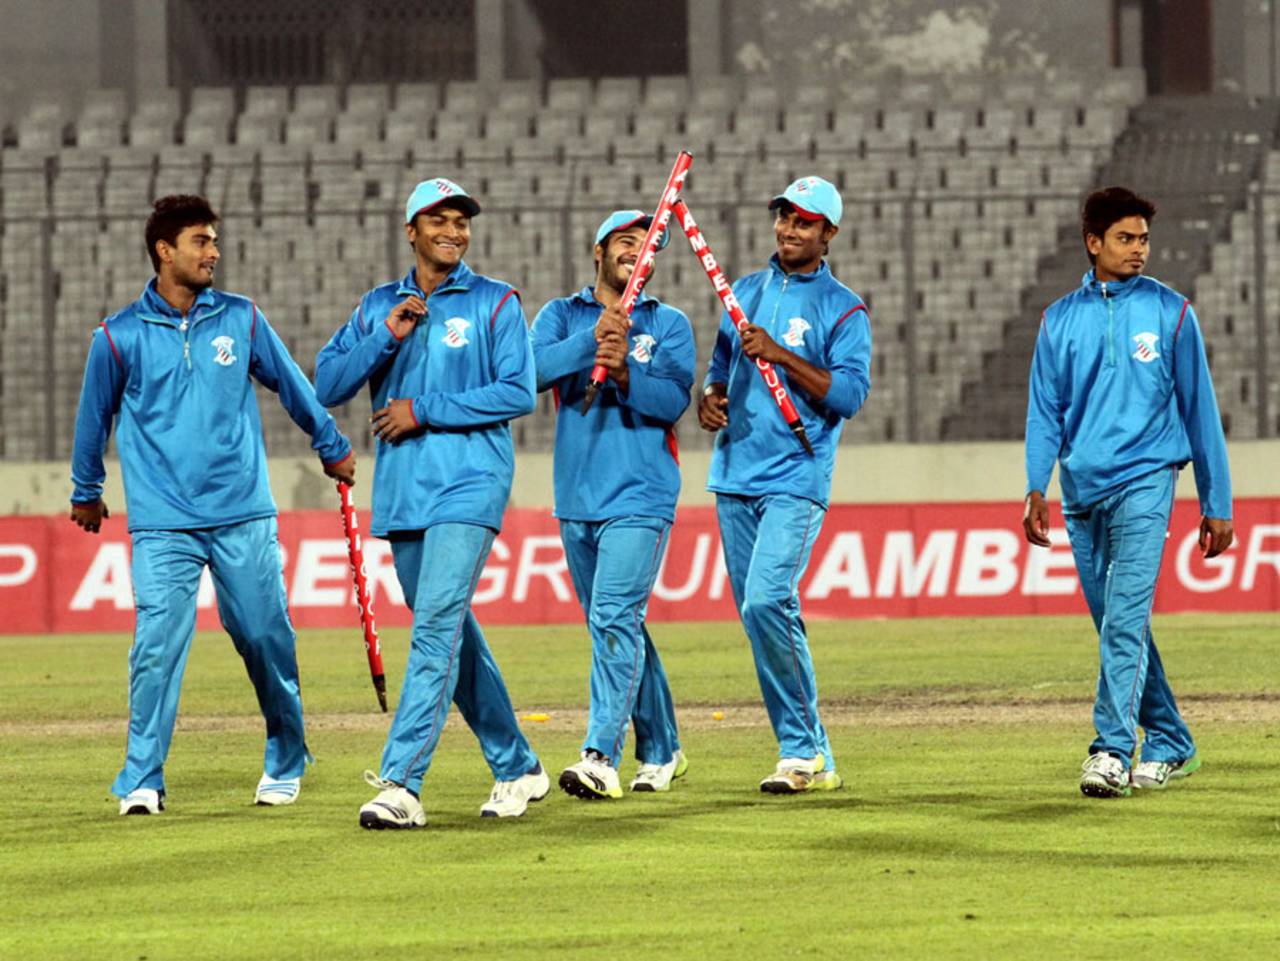 The lack of star players is one of the reasons Prime Bank Cricket Club have pulled out&nbsp;&nbsp;&bull;&nbsp;&nbsp;BCB